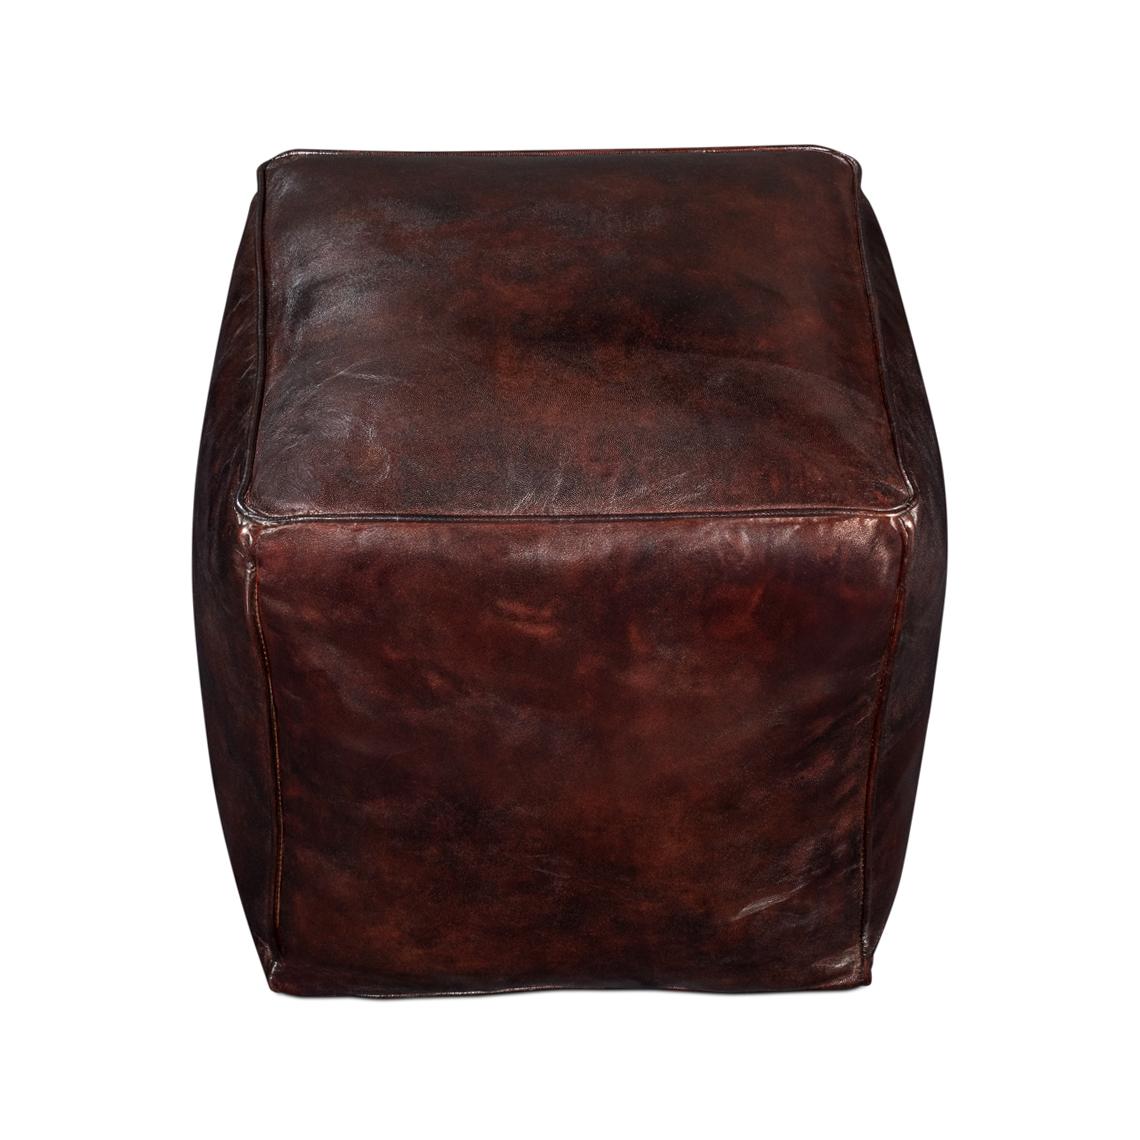 Modern Dark Brown Leather Cube For Sale